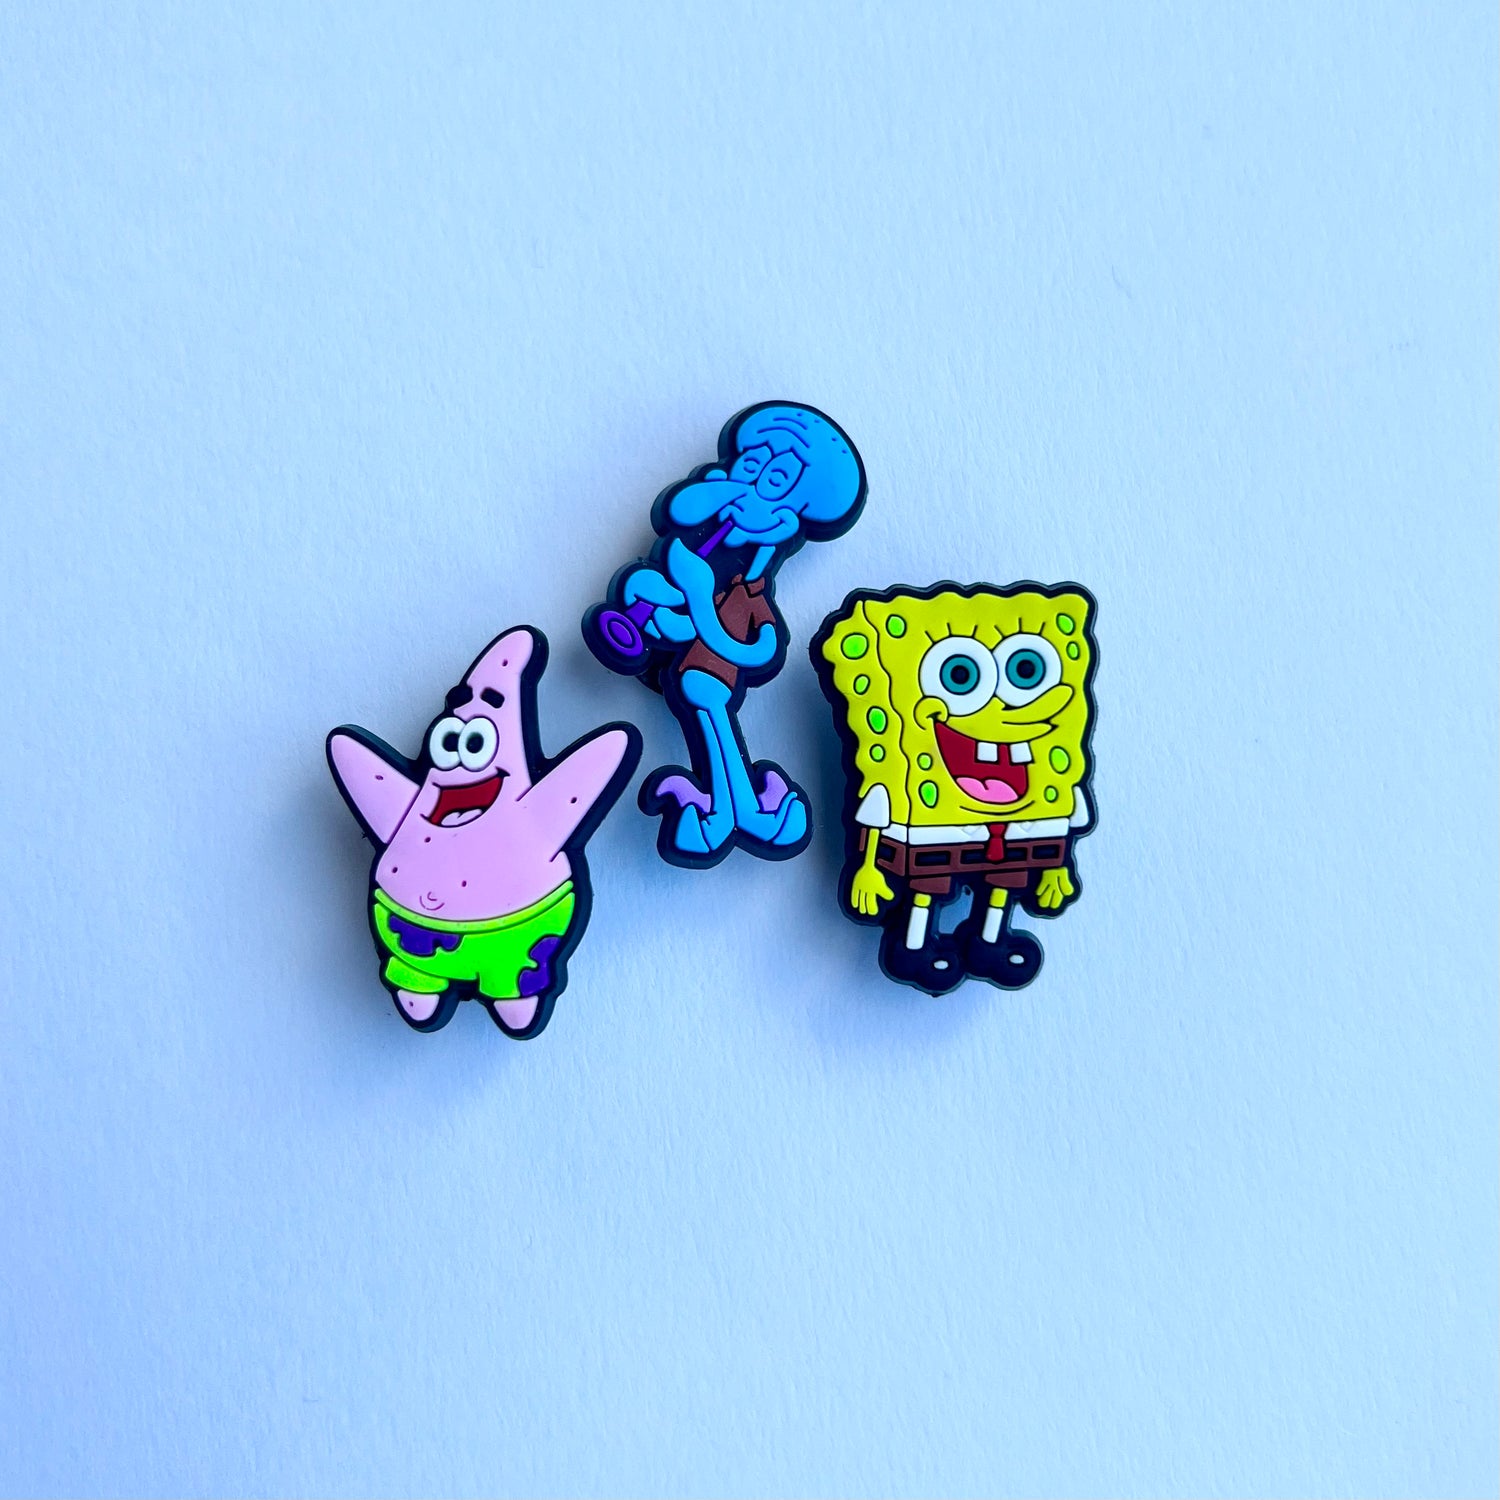 The Spongebob Charms Pack